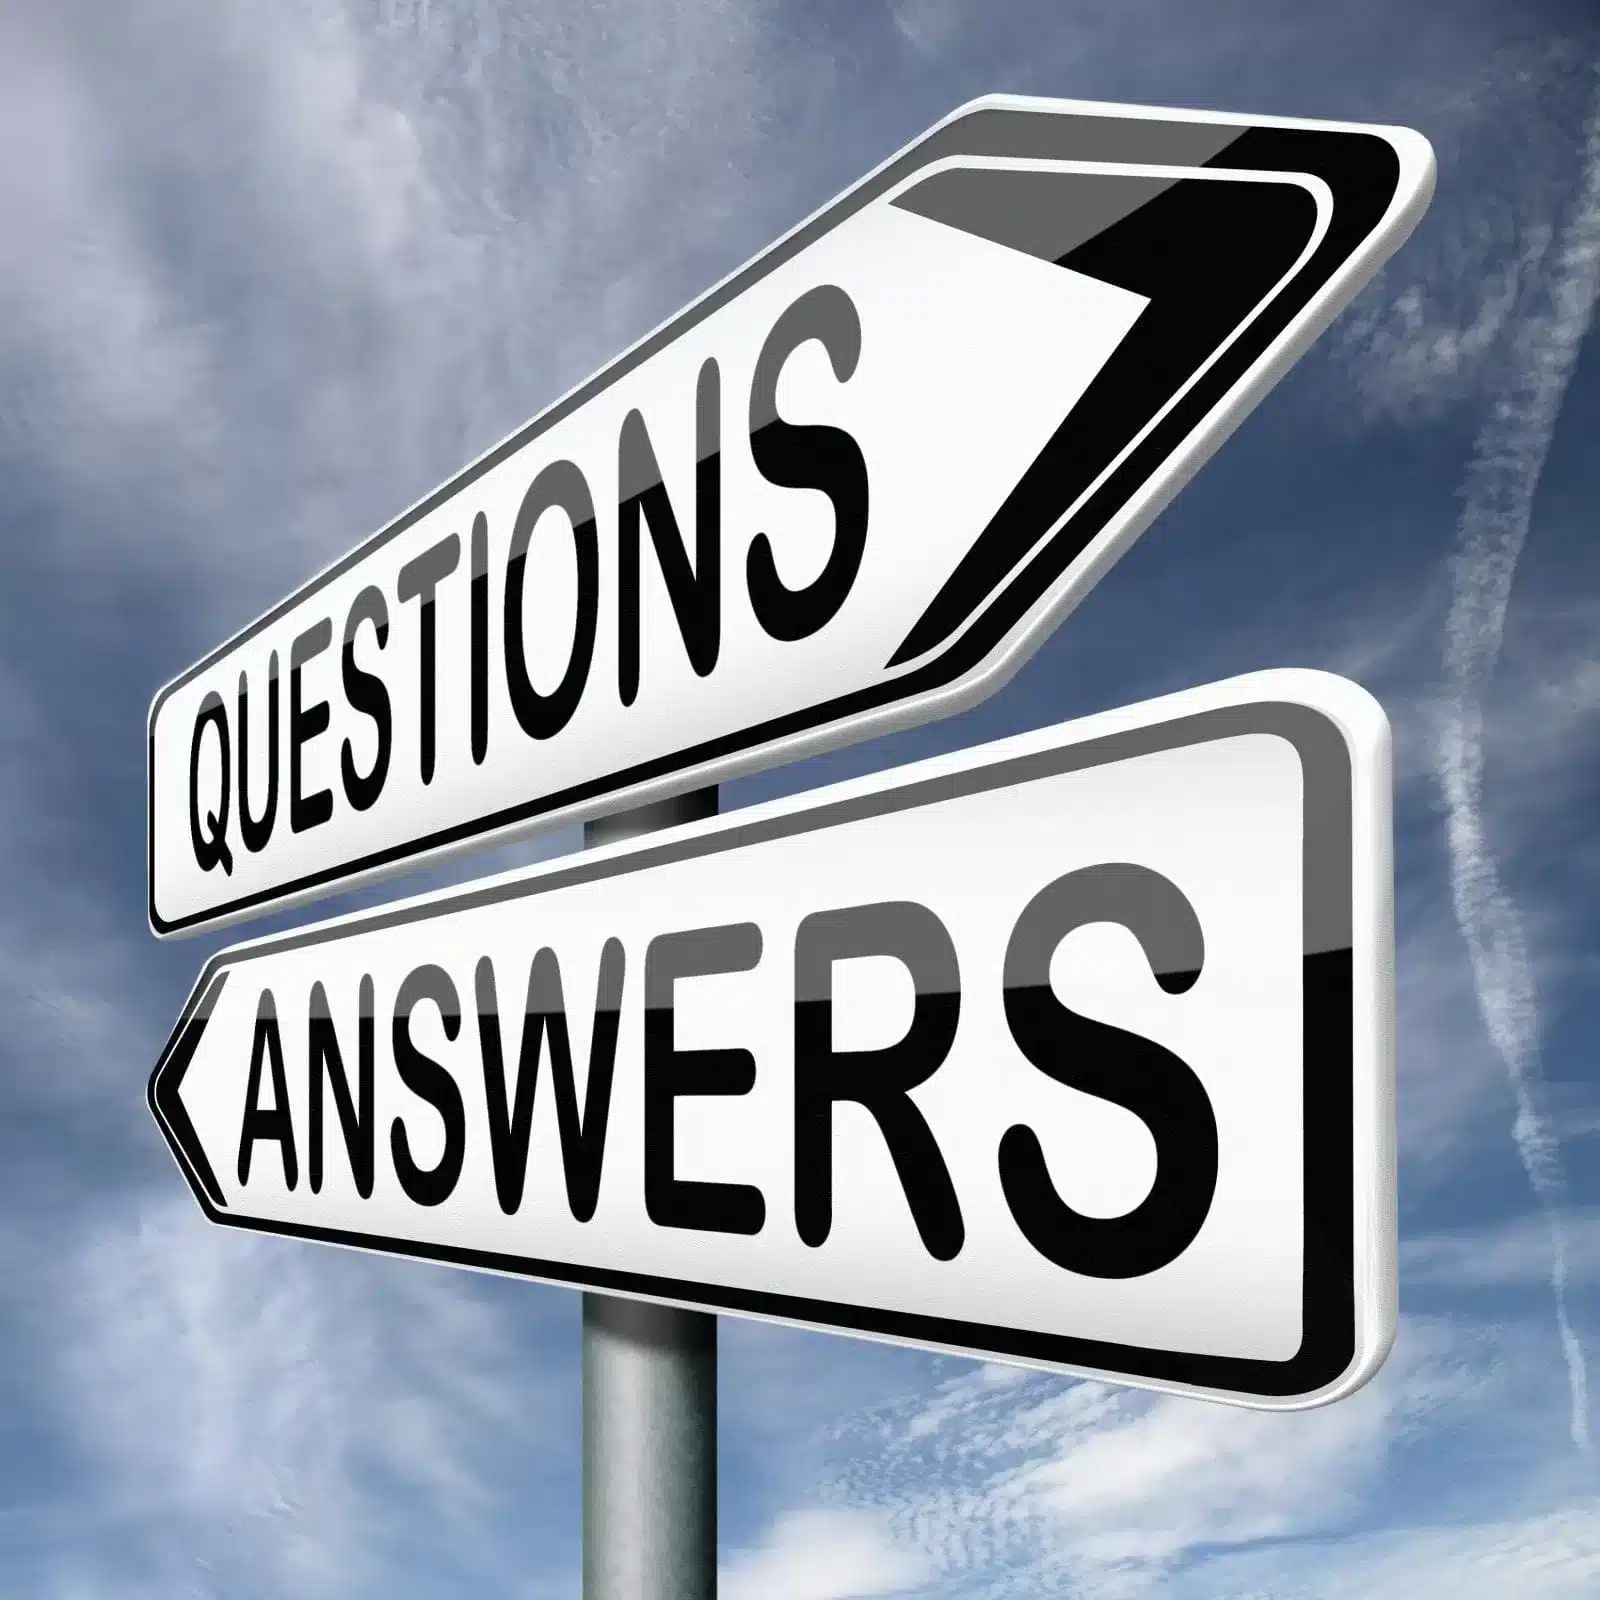 Sign for Questions and Answers